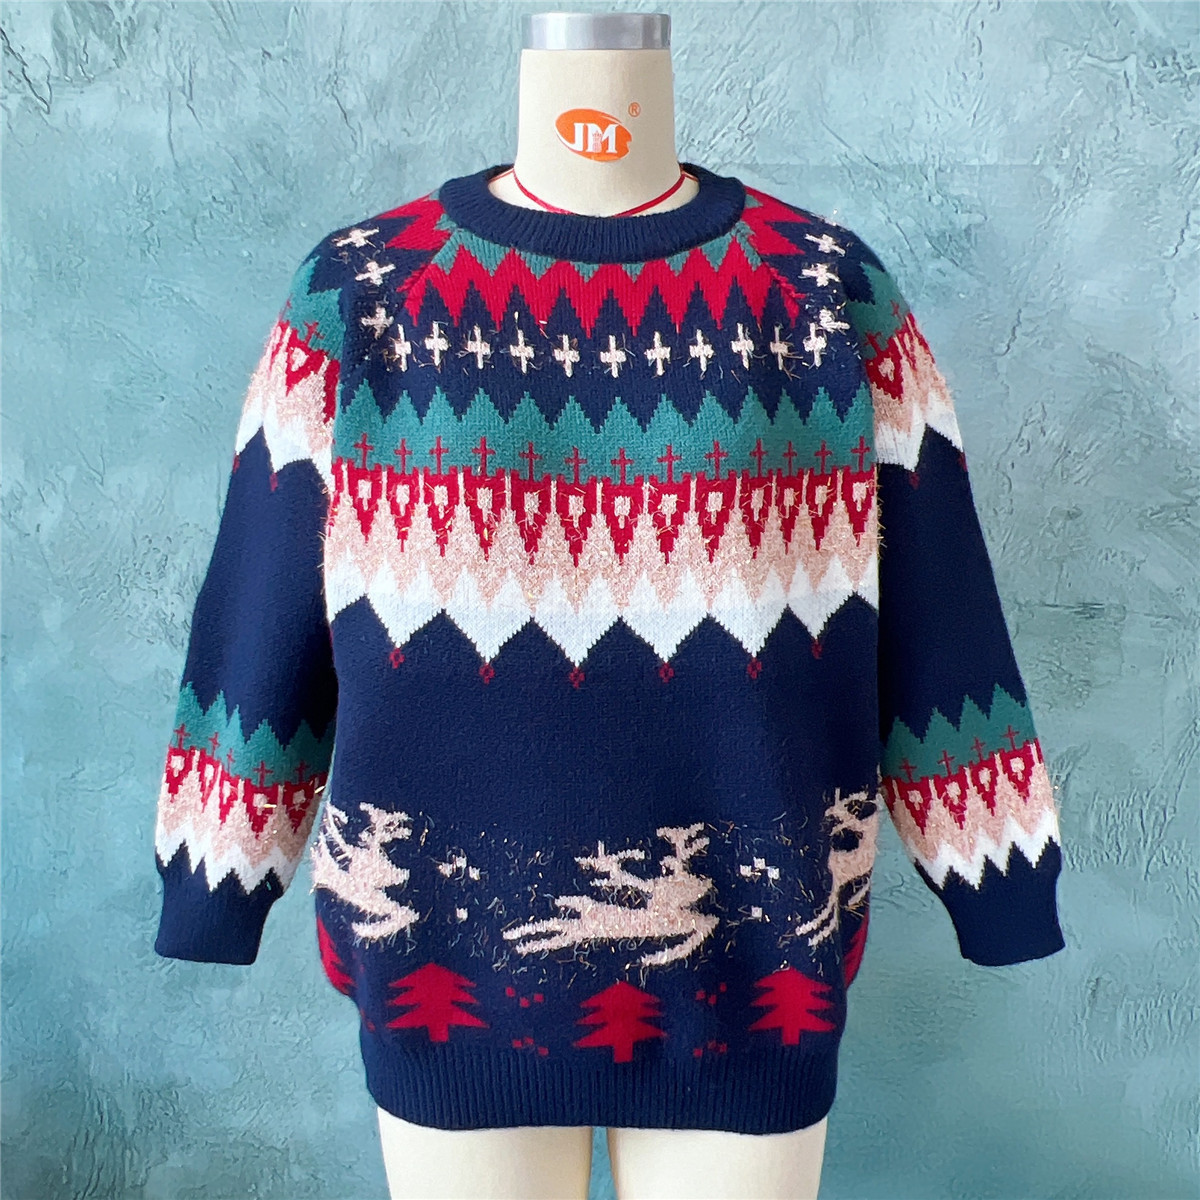 Ugly Christmas Sweaters Canada on Tumblr